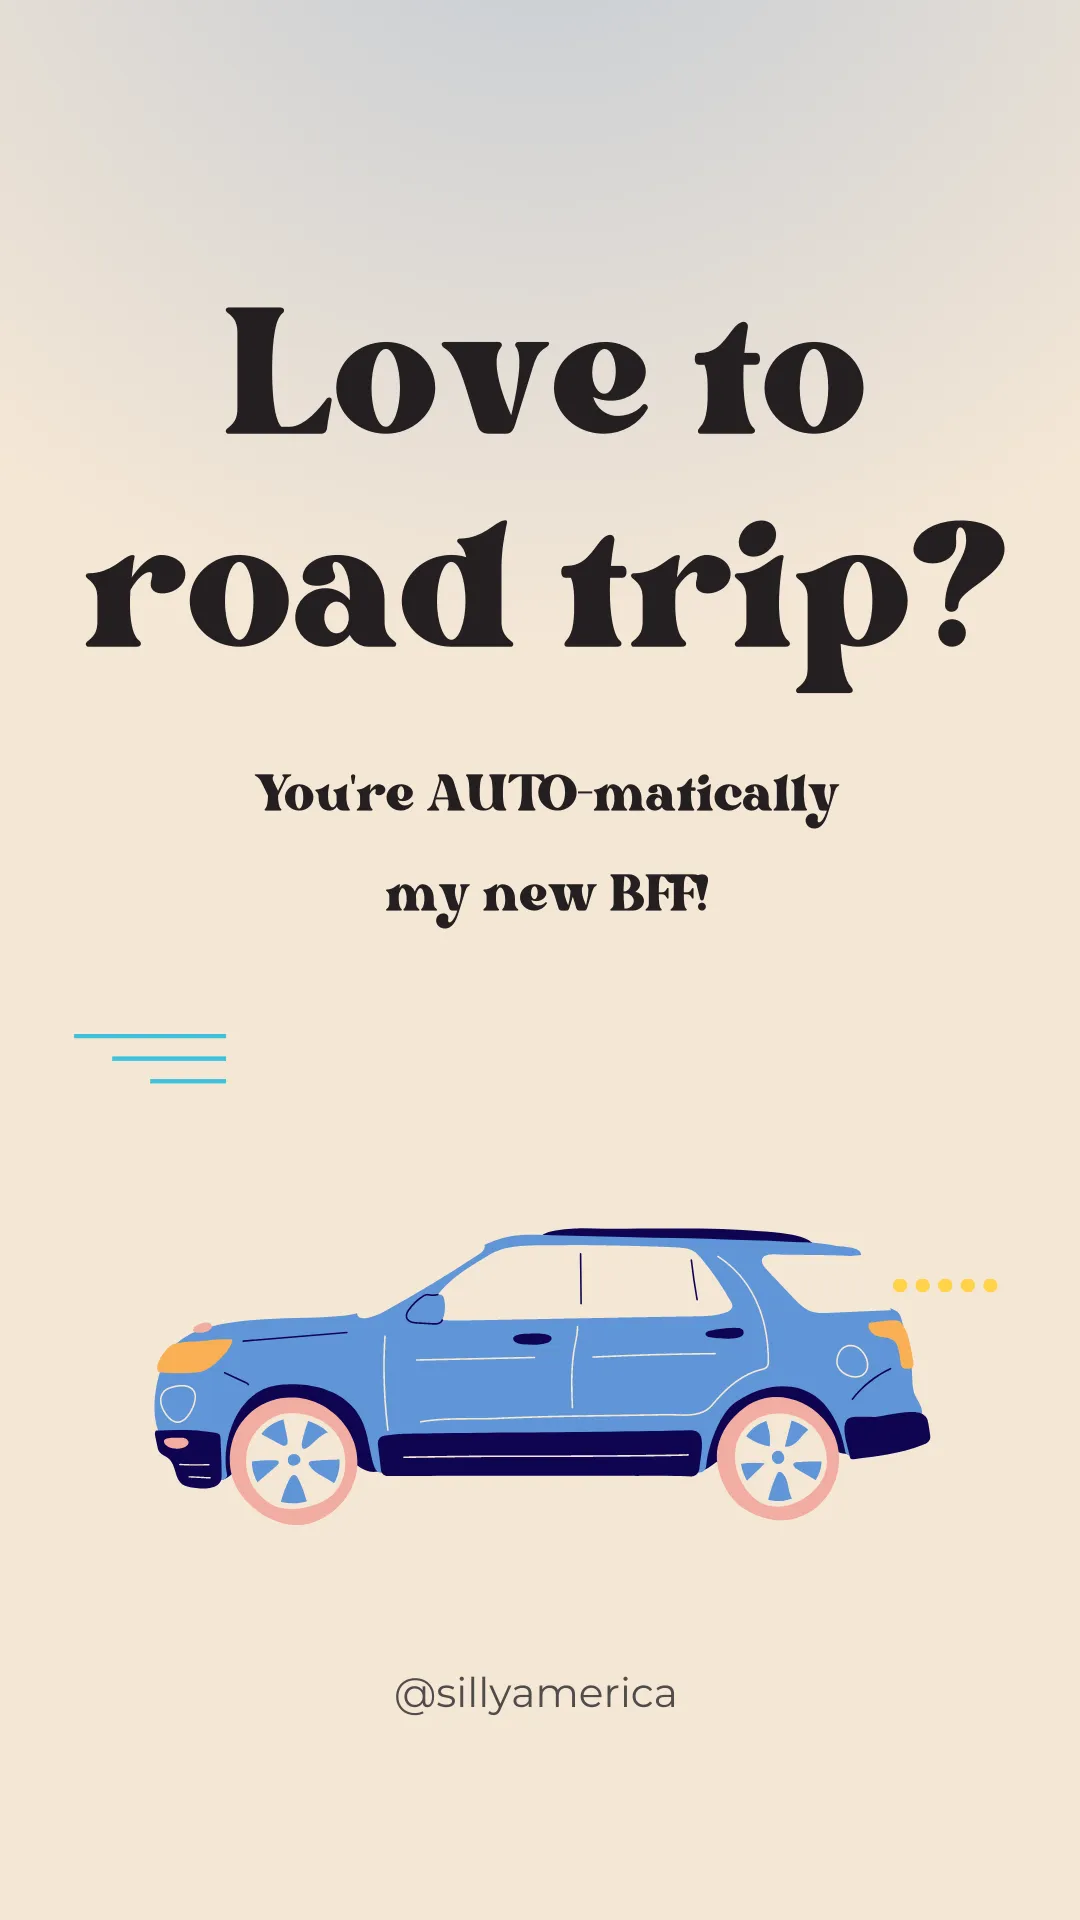 Love to road trip? You're AUTO-matically my new BFF! - Road Trip Puns